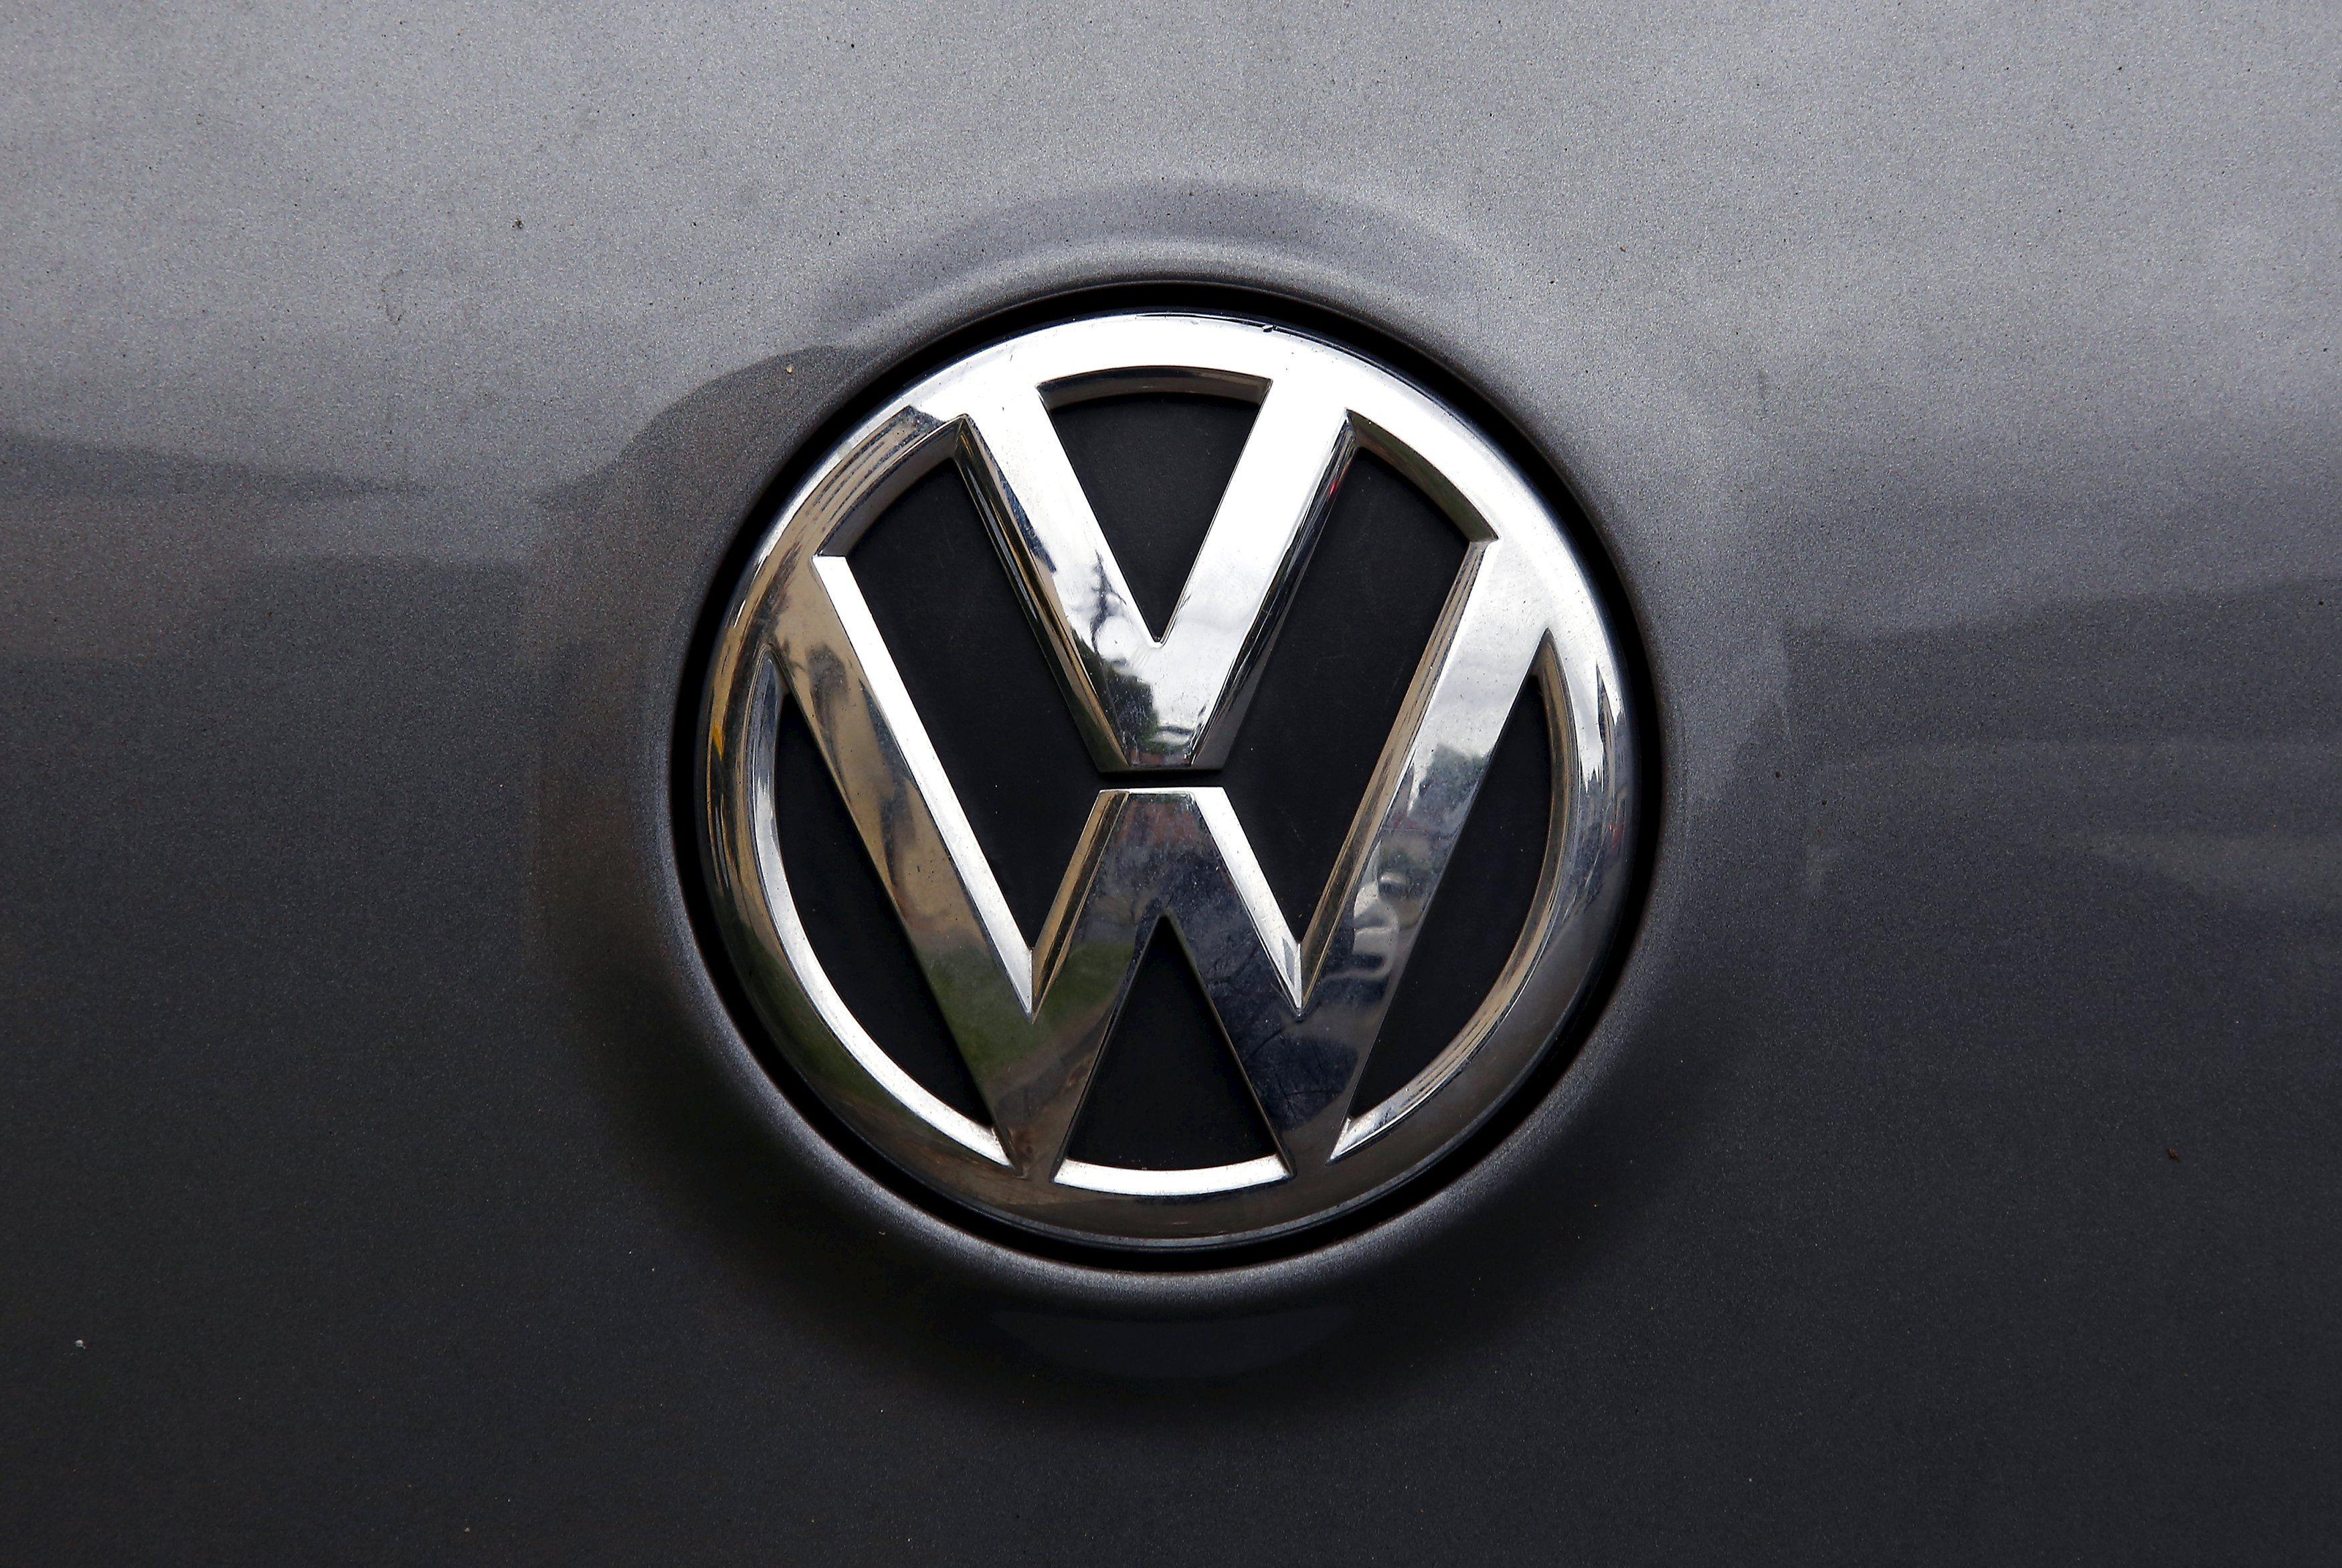 Cool VW Logo - VW to freeze promotions due to emissions scandal: report - The ...